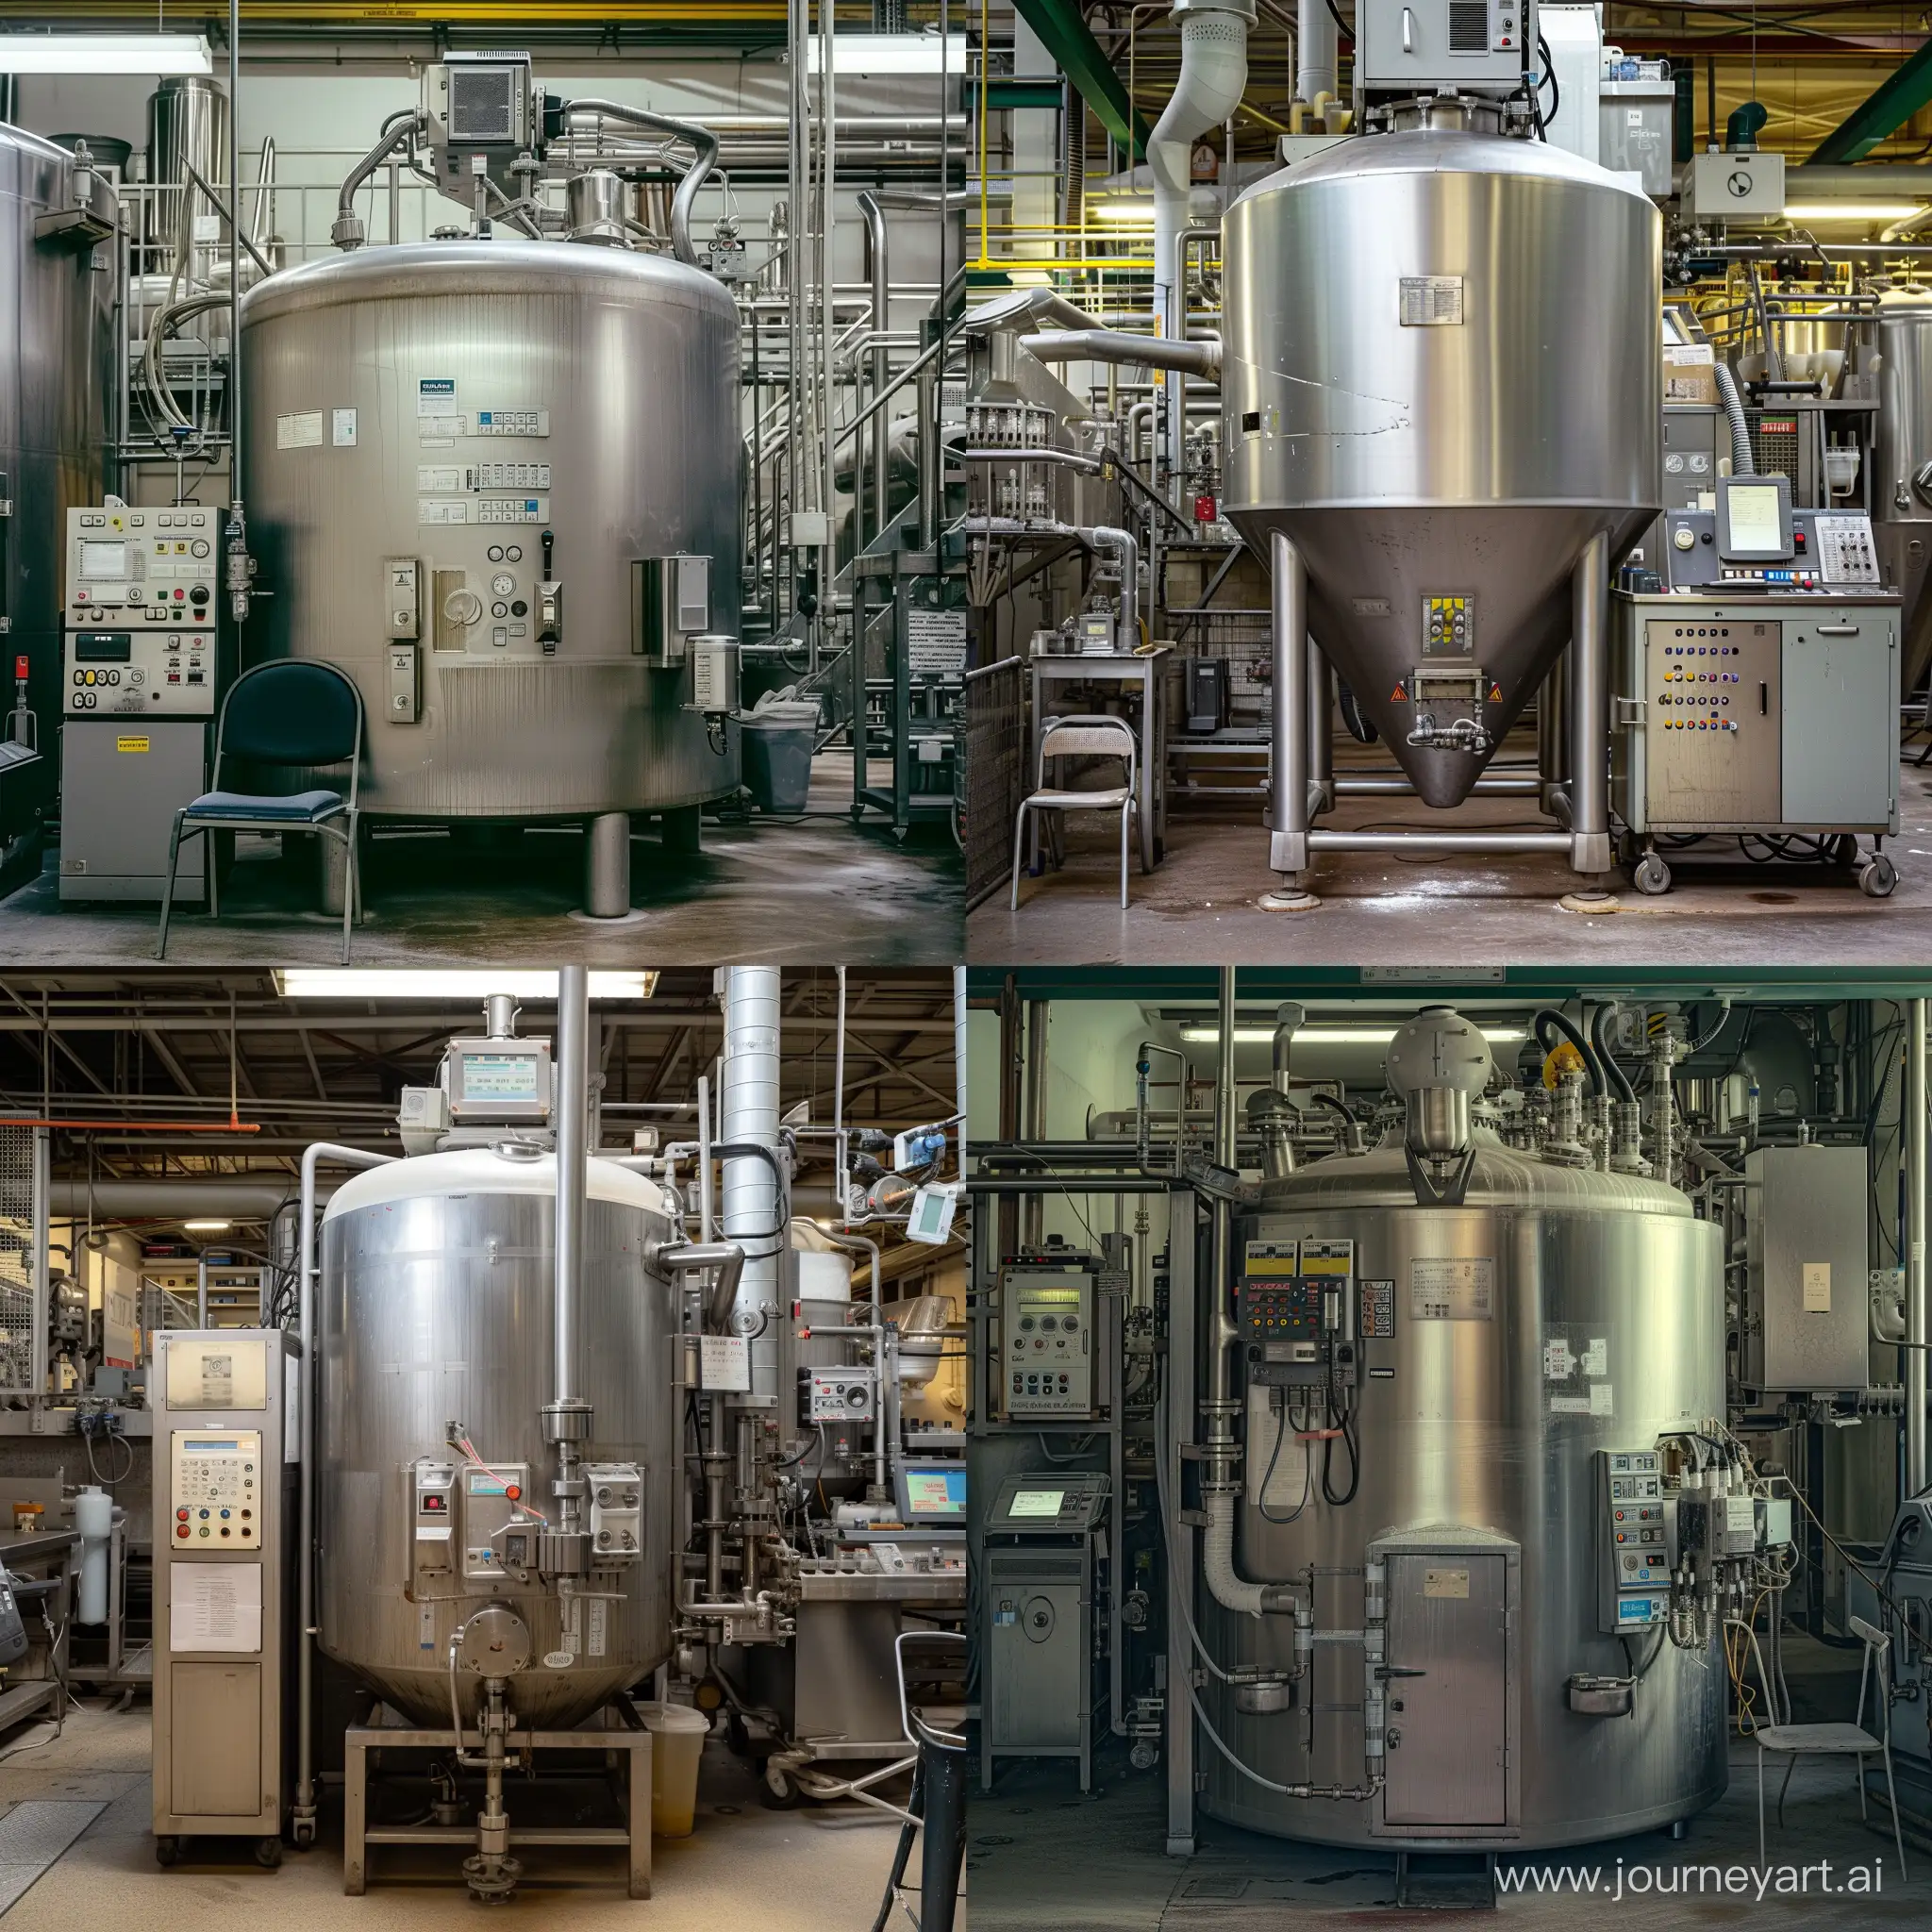 Modern-Dairy-Factory-Interior-with-Condensed-Milk-Processing-Equipment